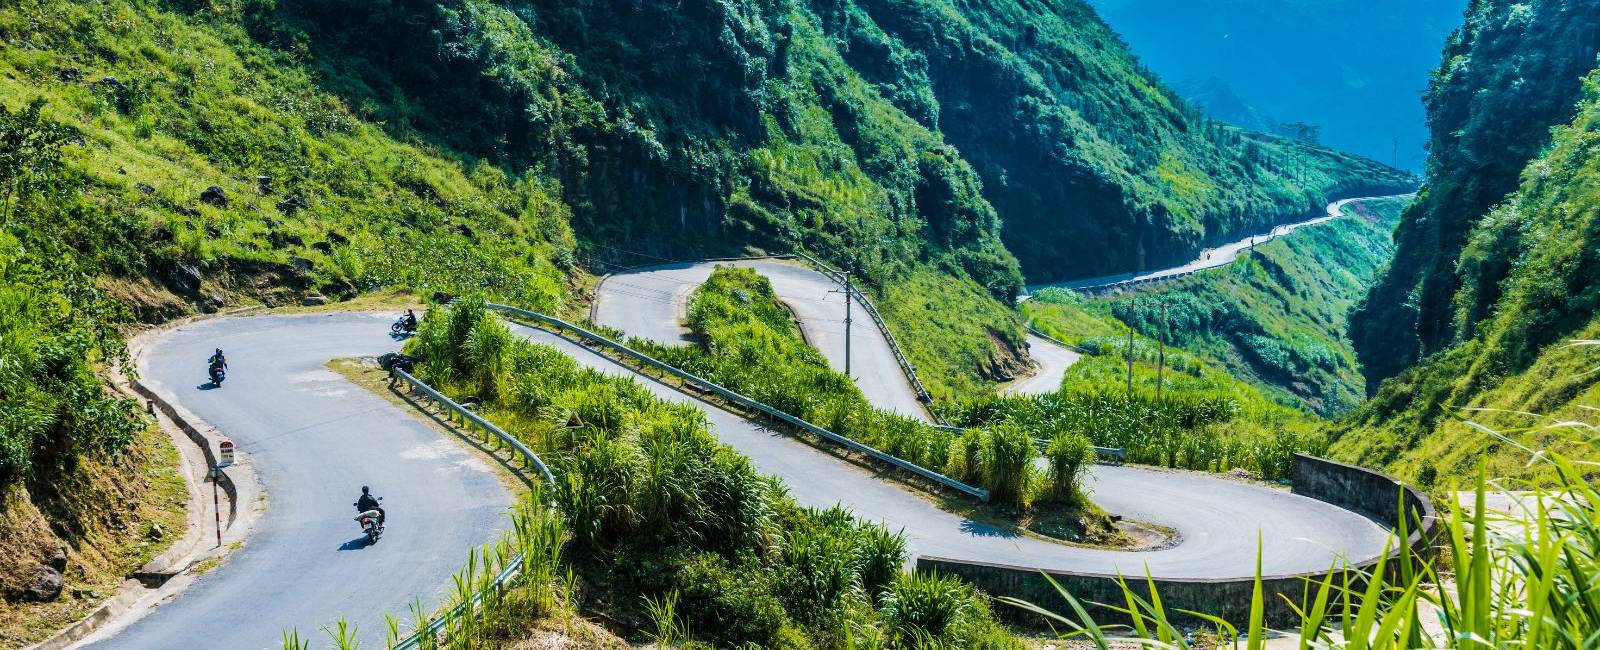 Top 10 Things To Do In Ha Giang